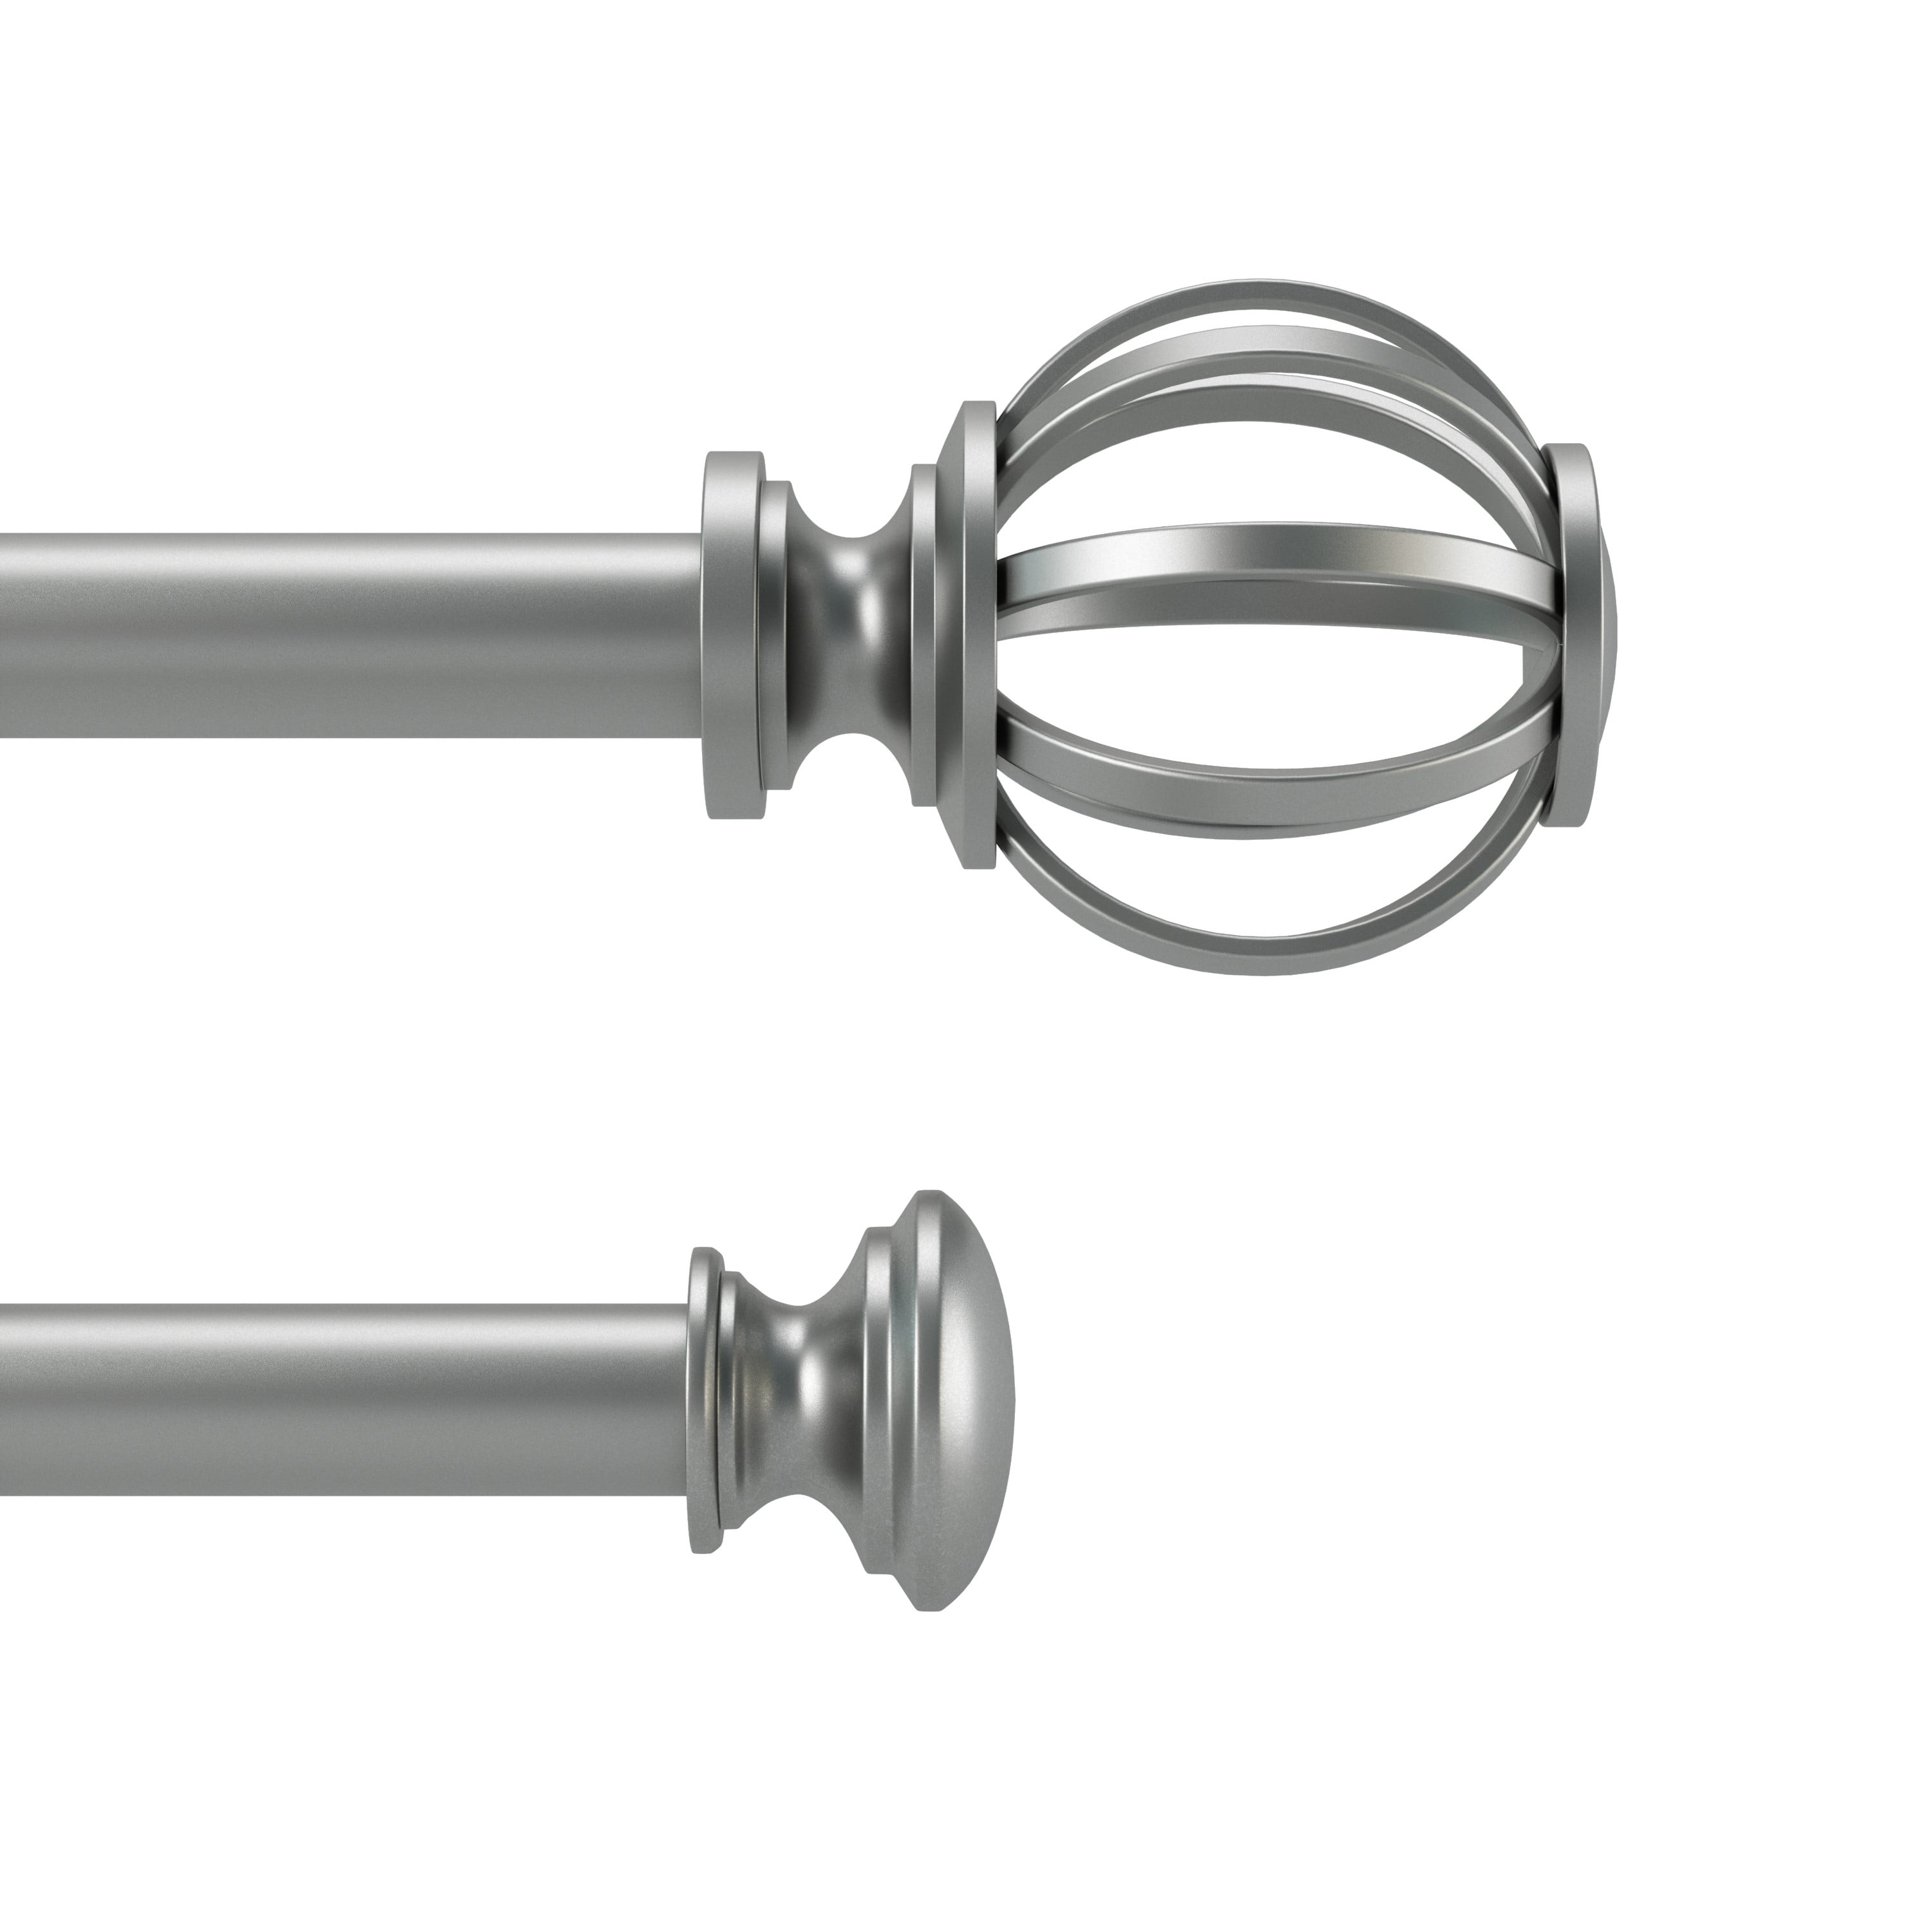 LOOK**** Beautiful Metal Curtain Pole Cage Finials  Brand New And Sealed****LOOK 